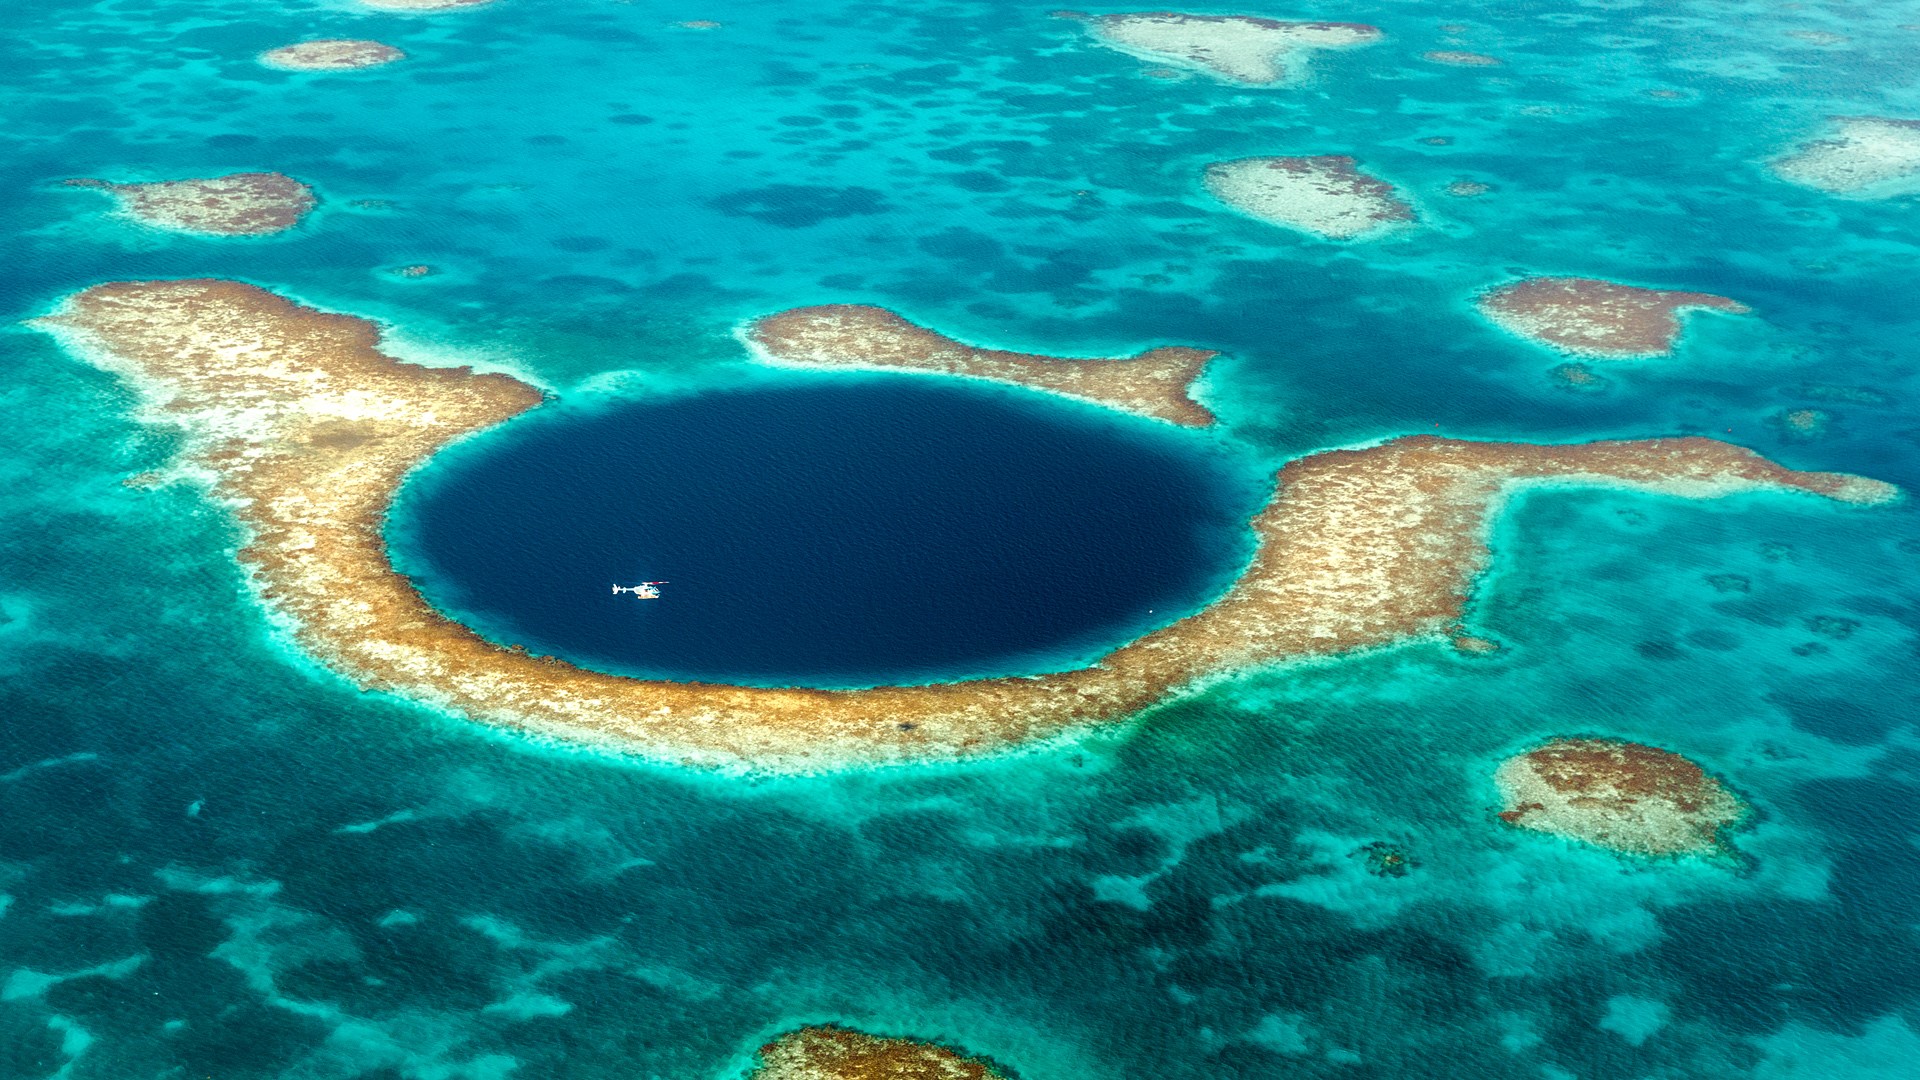 Helicopter above the Great Blue Hole, Belize Barrier Reef | Windows ...